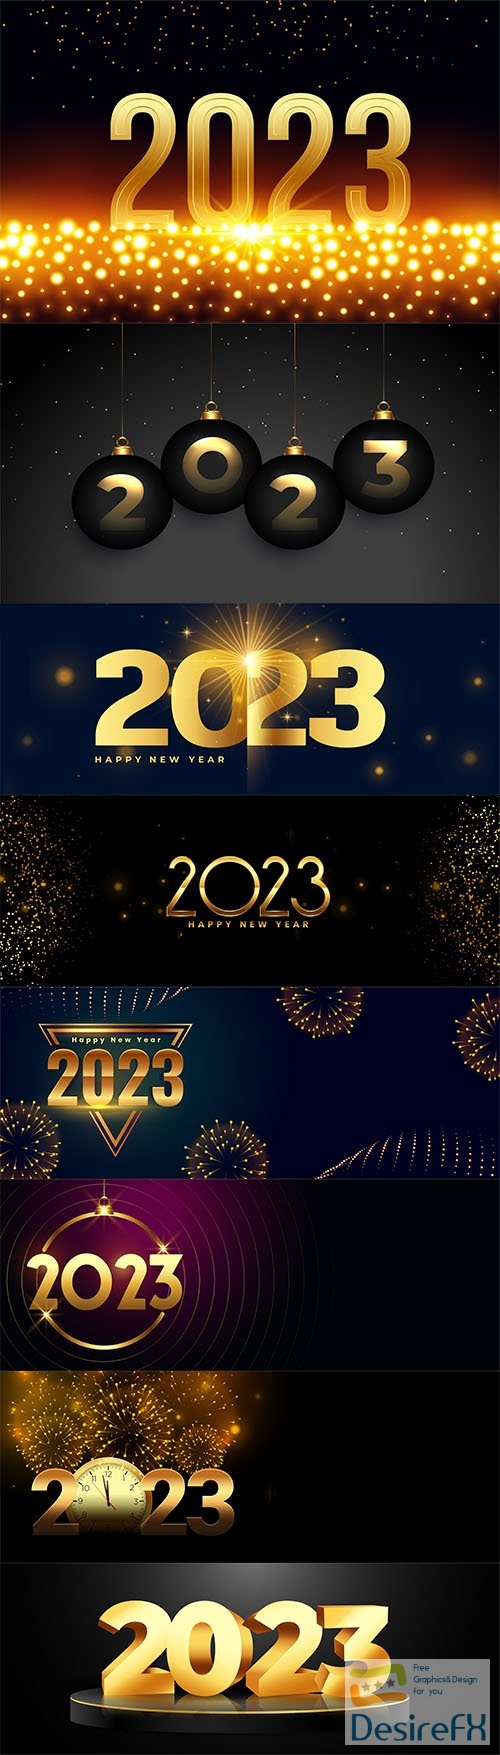 Download Elegant new year 2023 shiny background with light effect -  